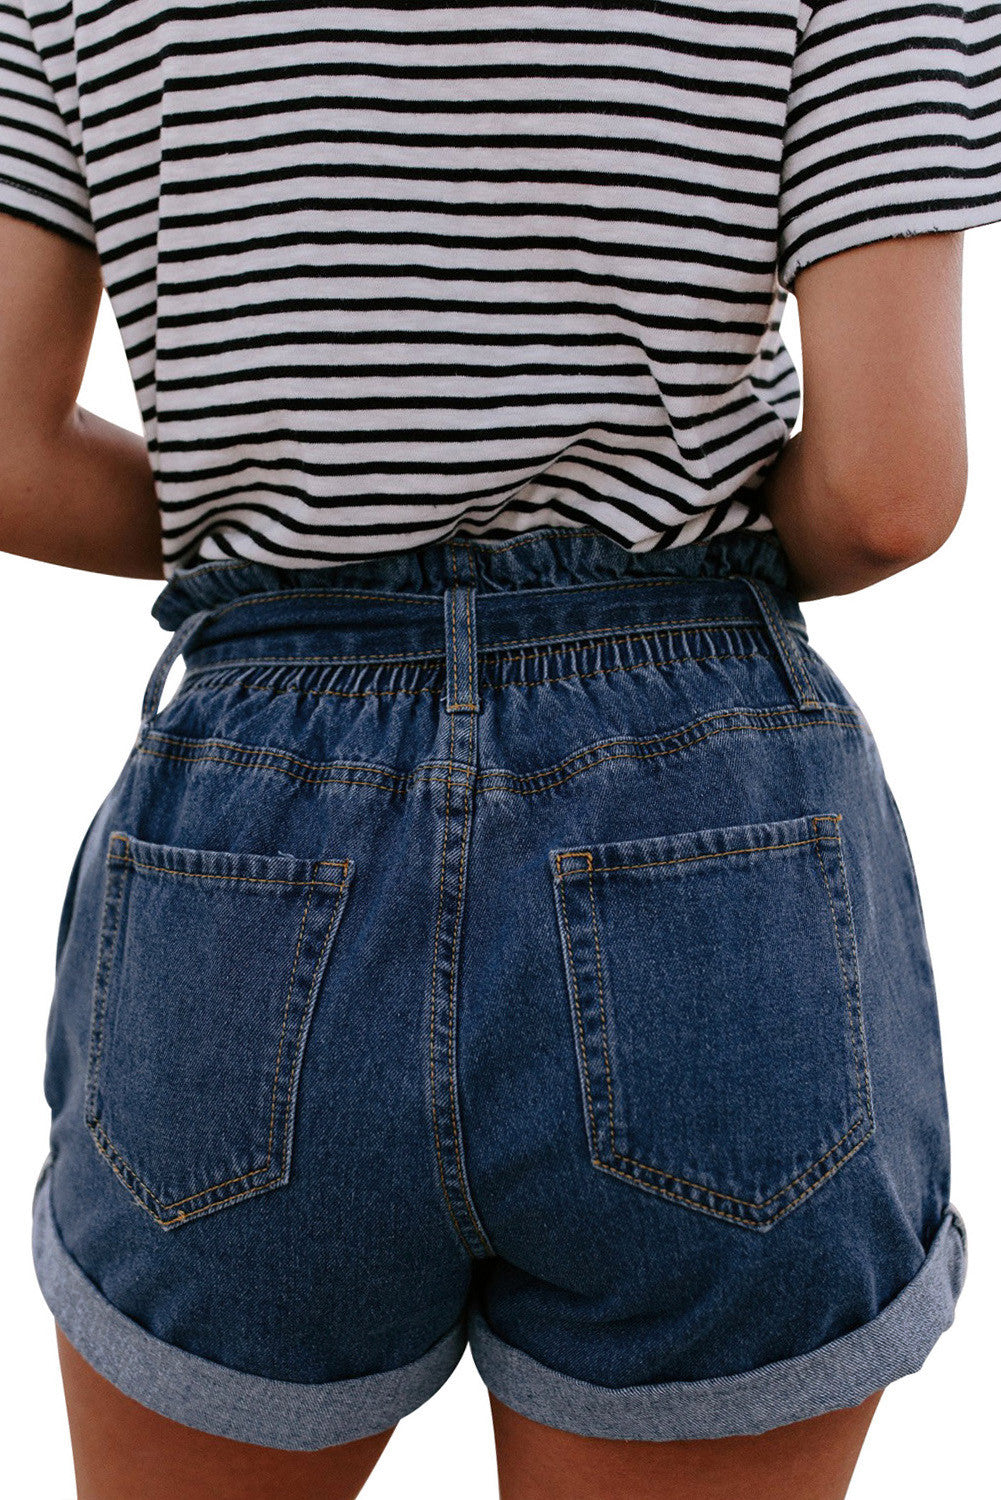 Always Shorts in Denim - Southern Grace Creations